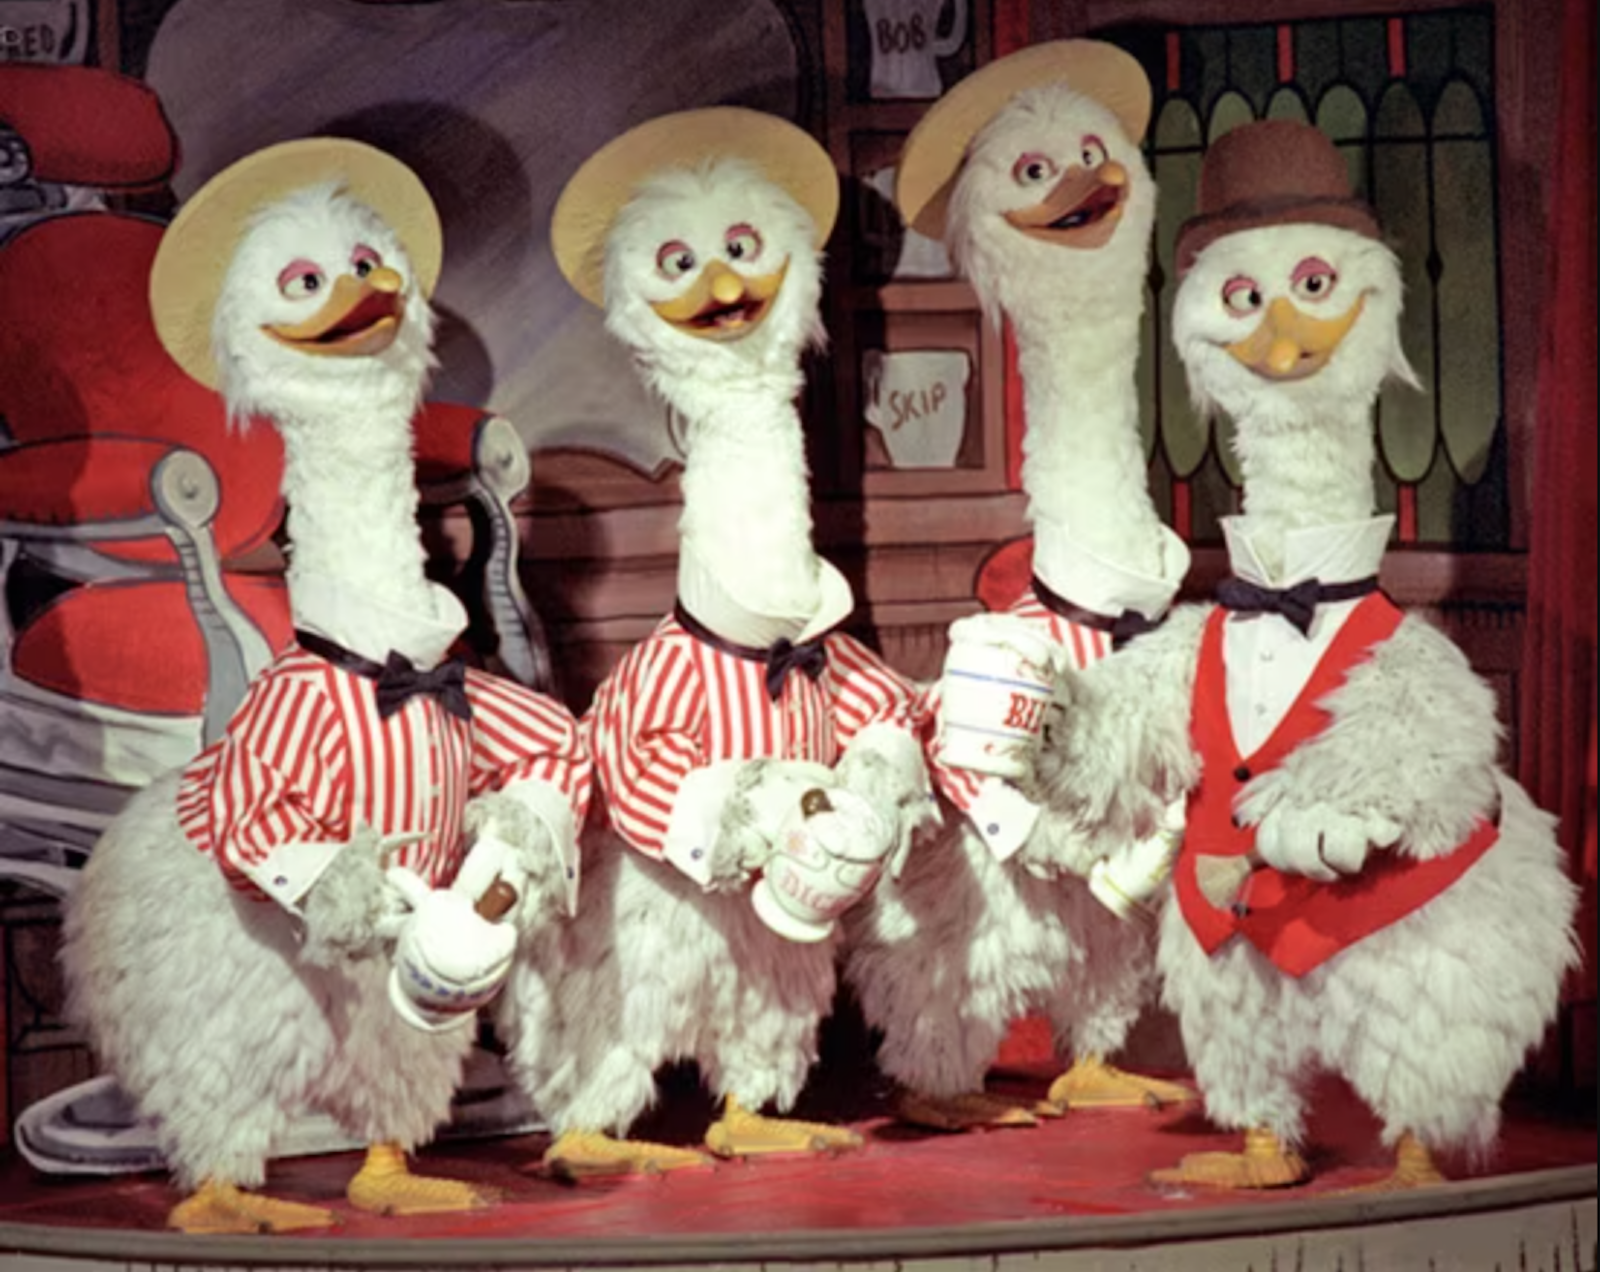 A cast of audio-animatronic animals sang music from America's history in this retired attraction.